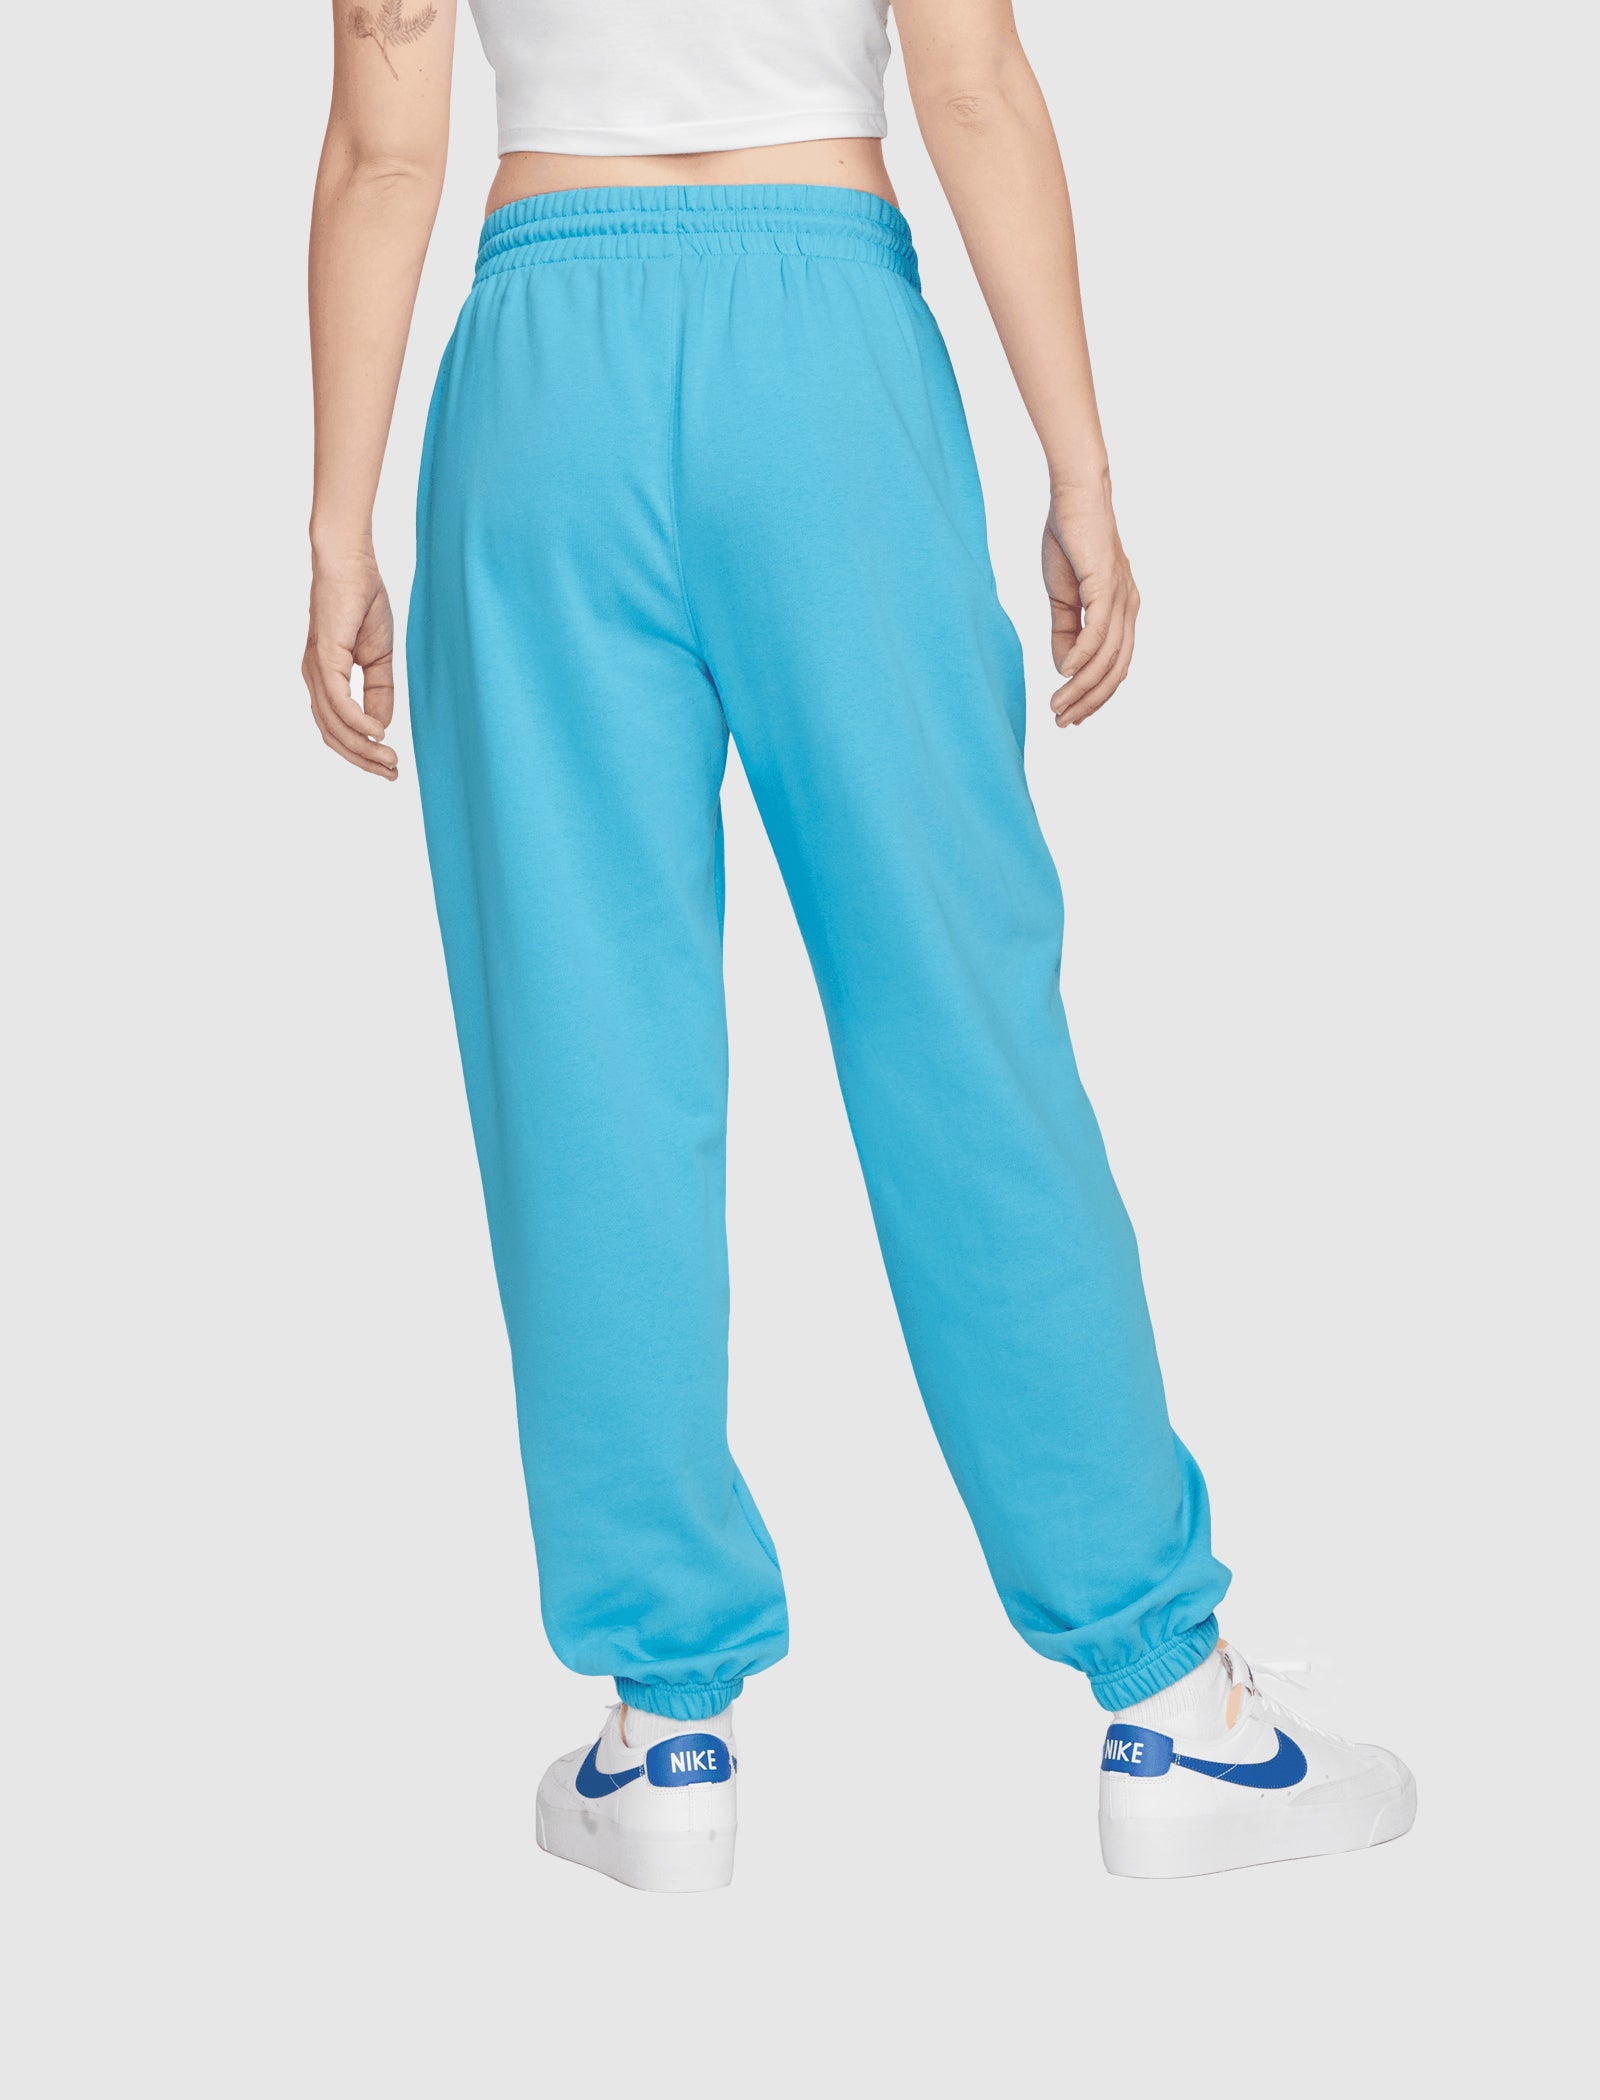 NIKE WOMEN'S HIGH-WAISTED FRENCH TERRY PANTS